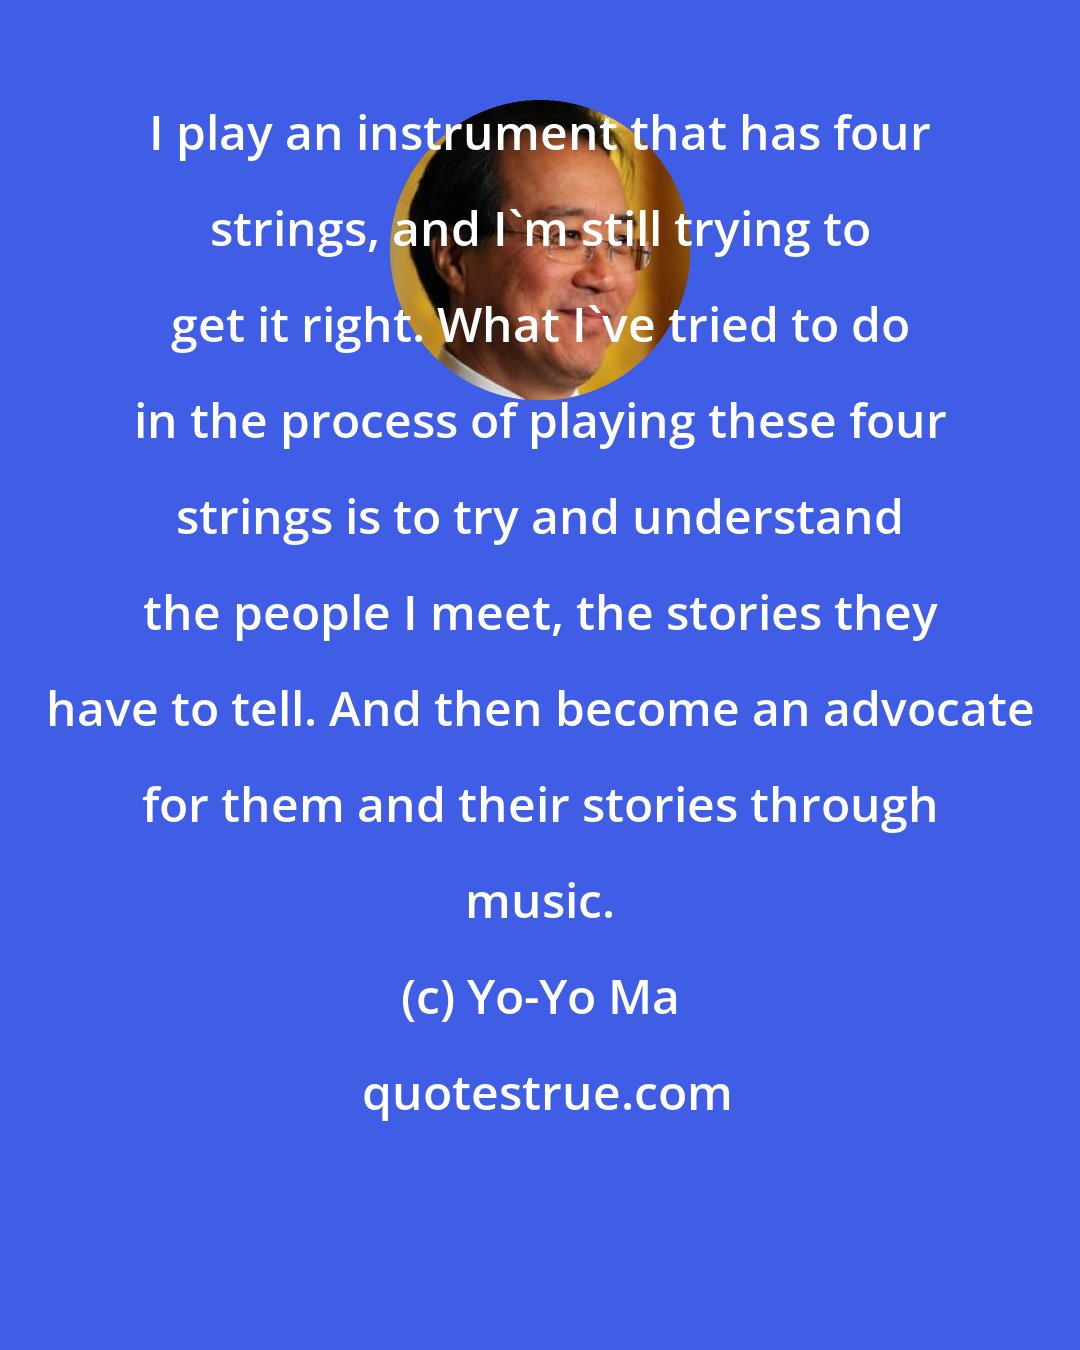 Yo-Yo Ma: I play an instrument that has four strings, and I'm still trying to get it right. What I've tried to do in the process of playing these four strings is to try and understand the people I meet, the stories they have to tell. And then become an advocate for them and their stories through music.